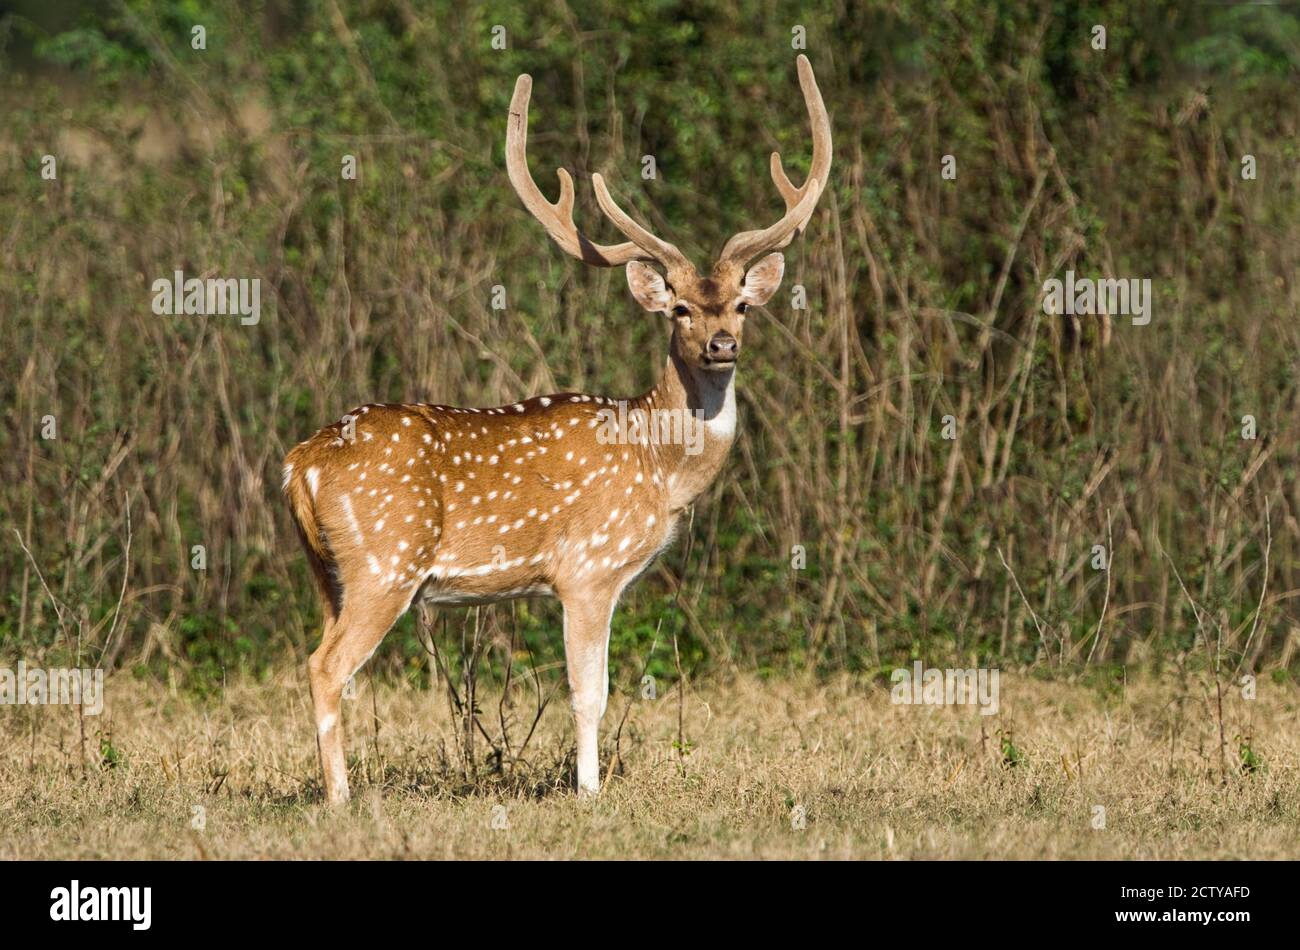 Spotted deer (Axis axis) in a forest, Keoladeo National Park, Rajasthan, India Stock Photo